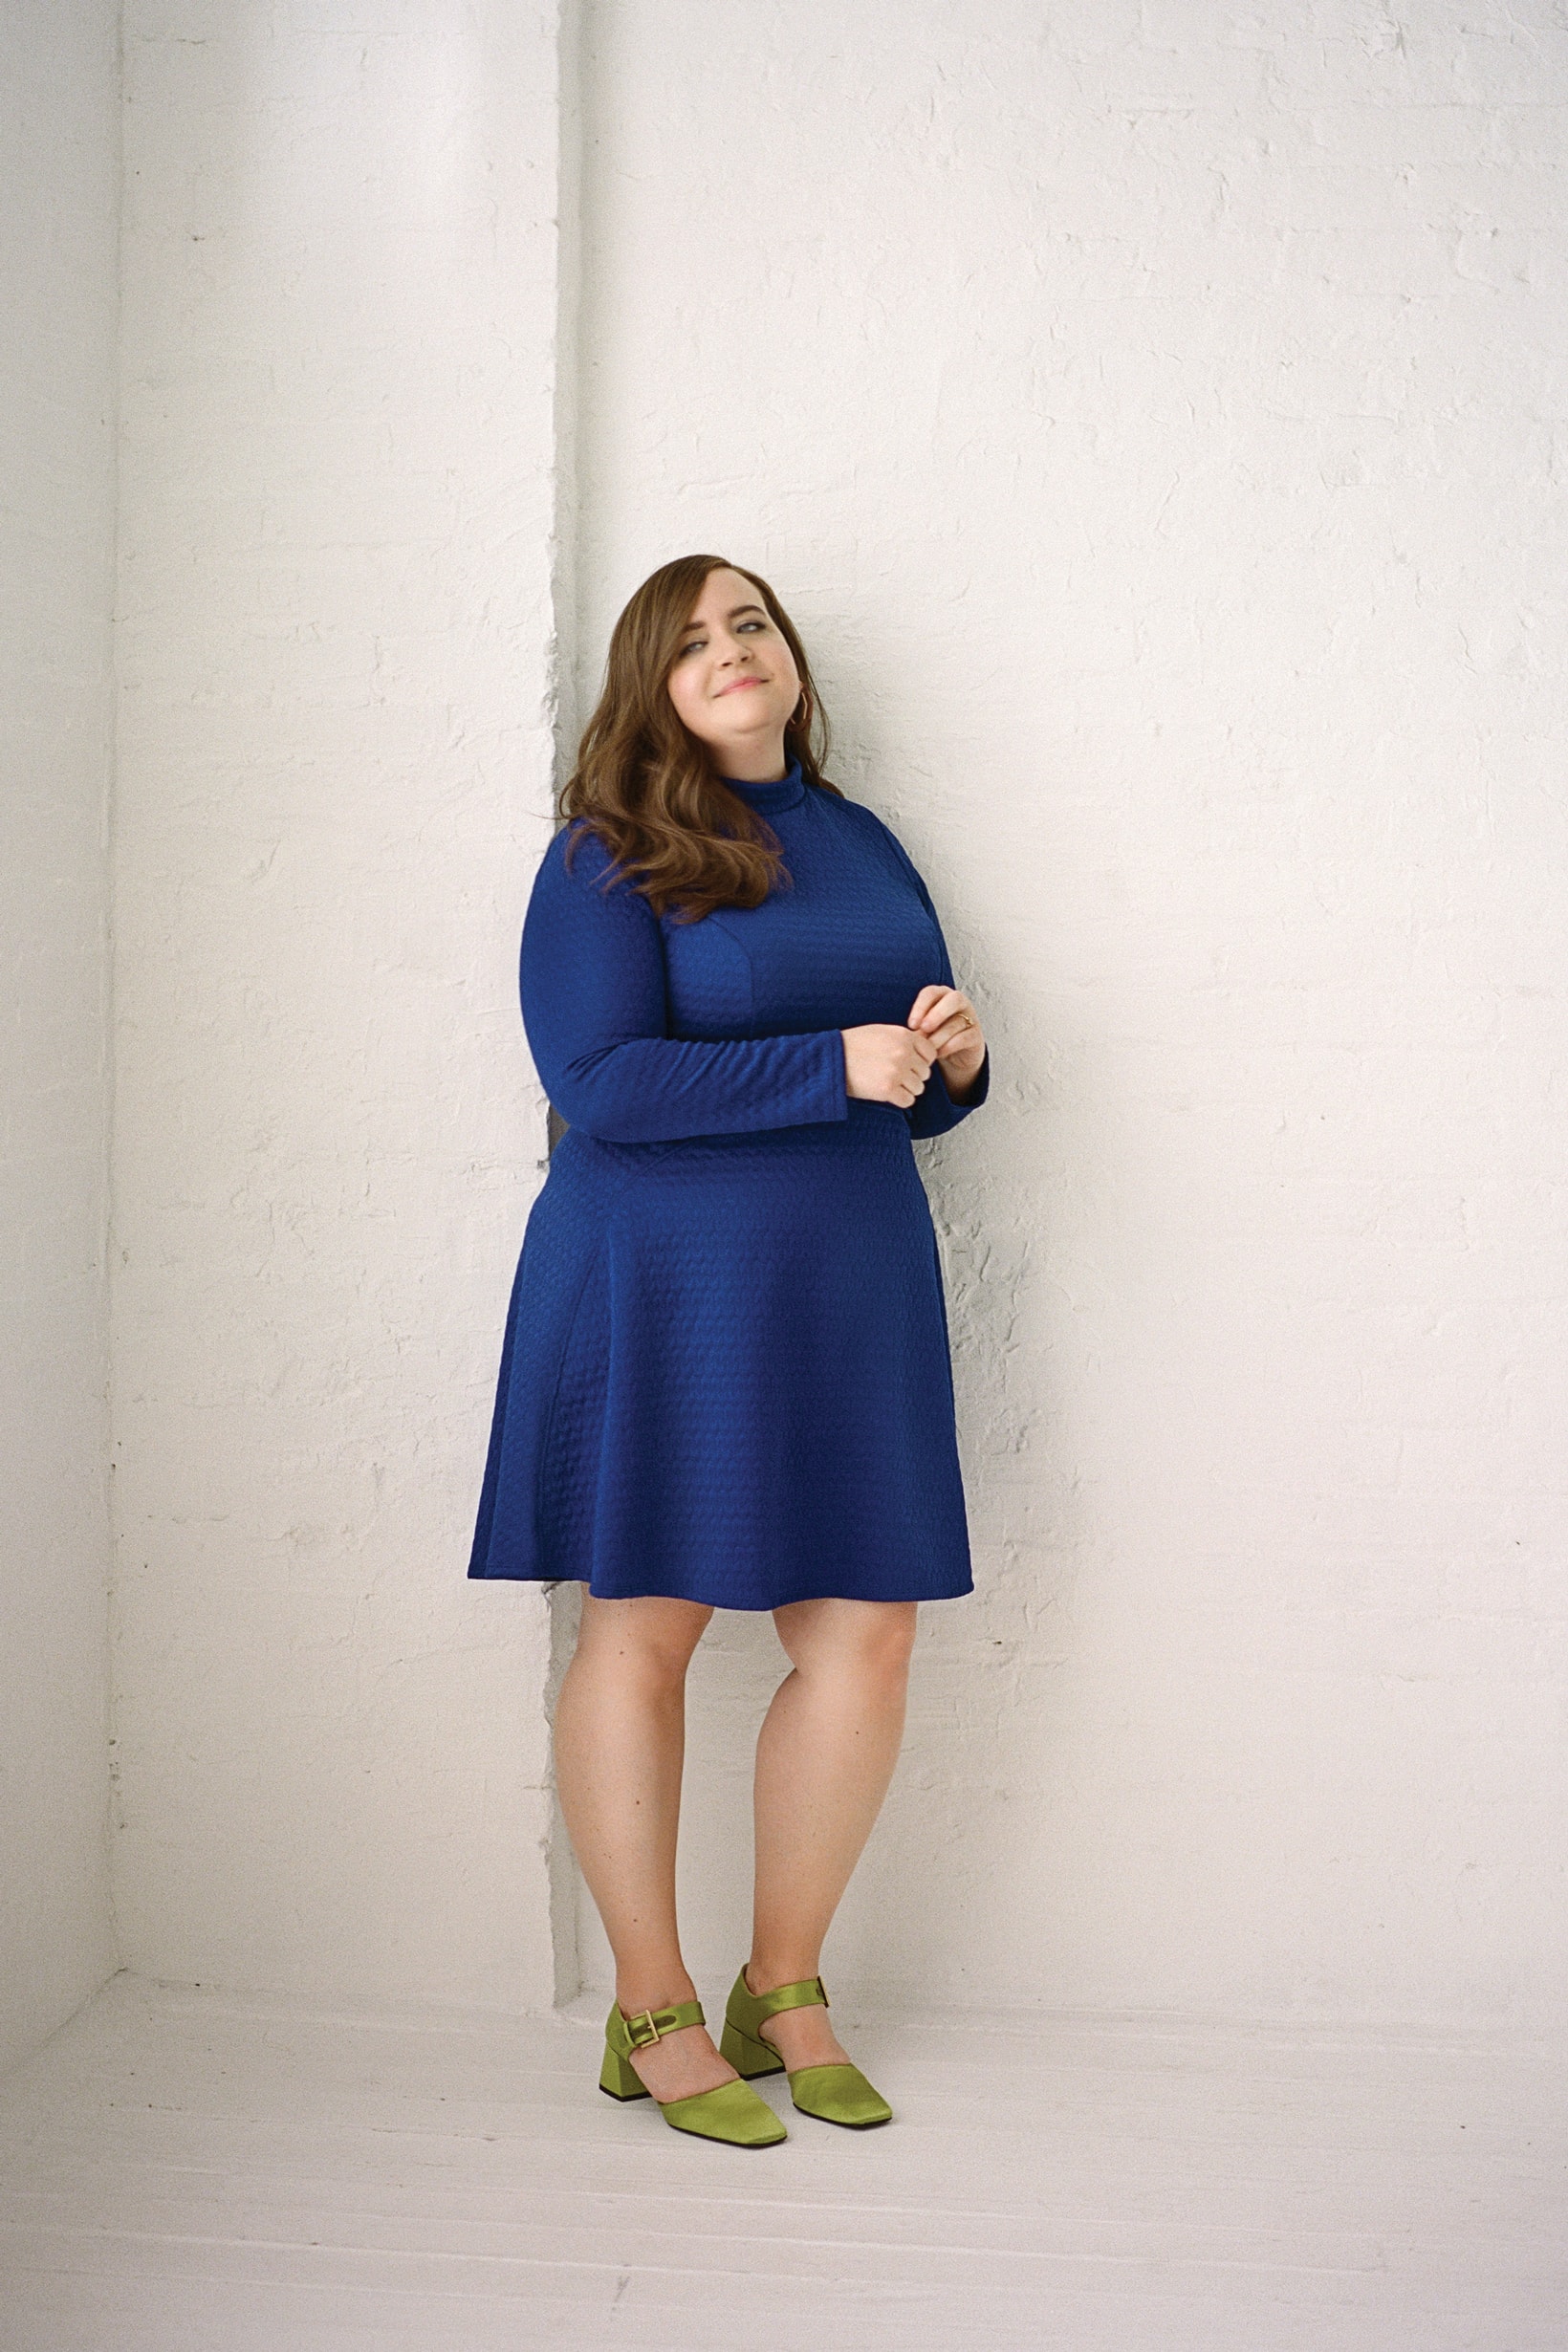 The Wing Spring 2019 Issue 3 No Man's Land Aidy Bryant Dress Blue Shoes Green